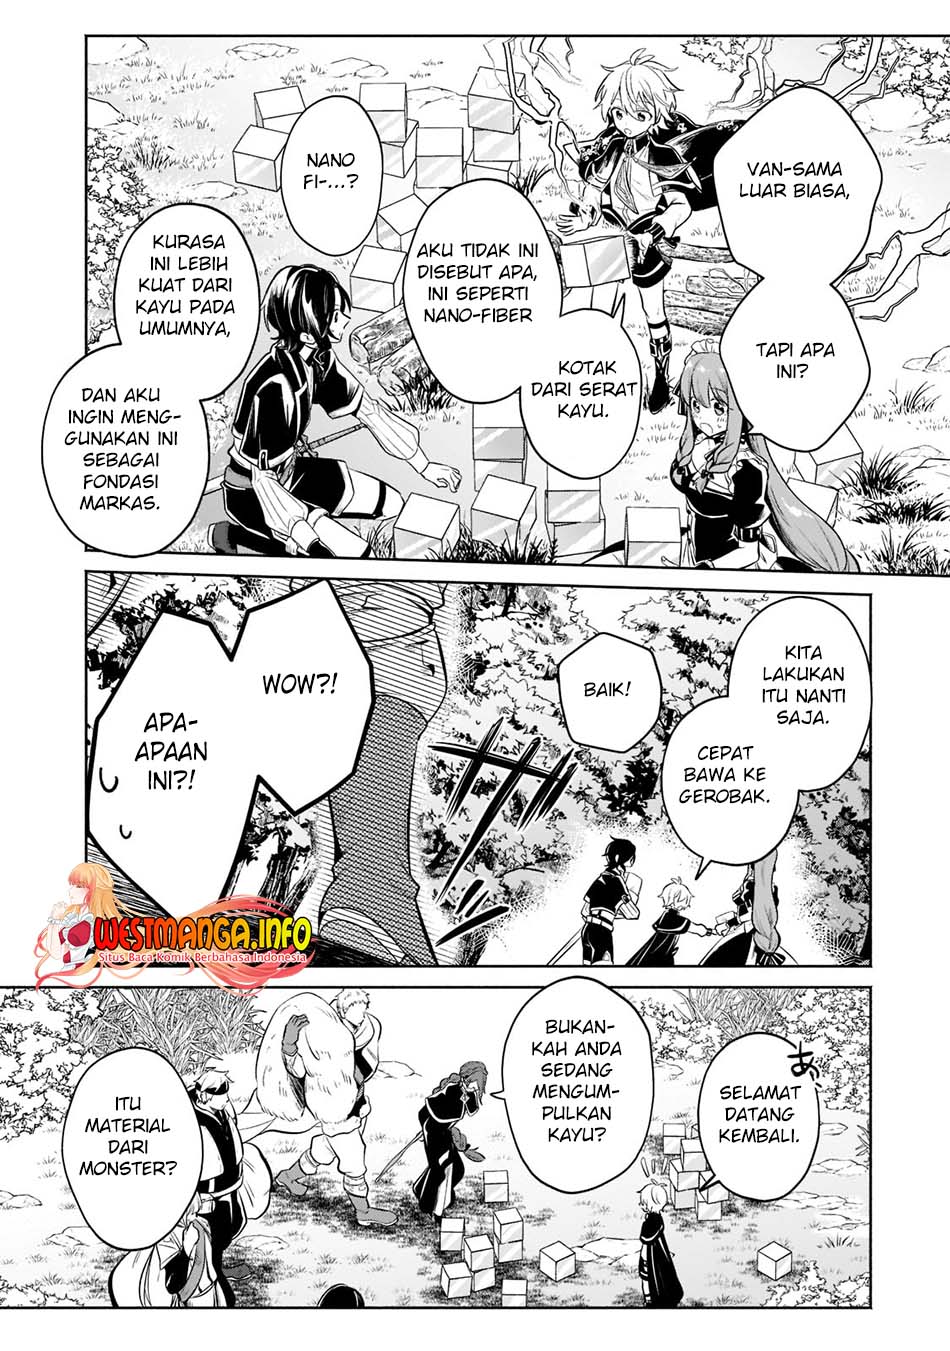 Fun Territory Defense Of The Easy-going Lord ~the Nameless Village Is Made Into The Strongest Fortified City By Production Magic~ Chapter 08